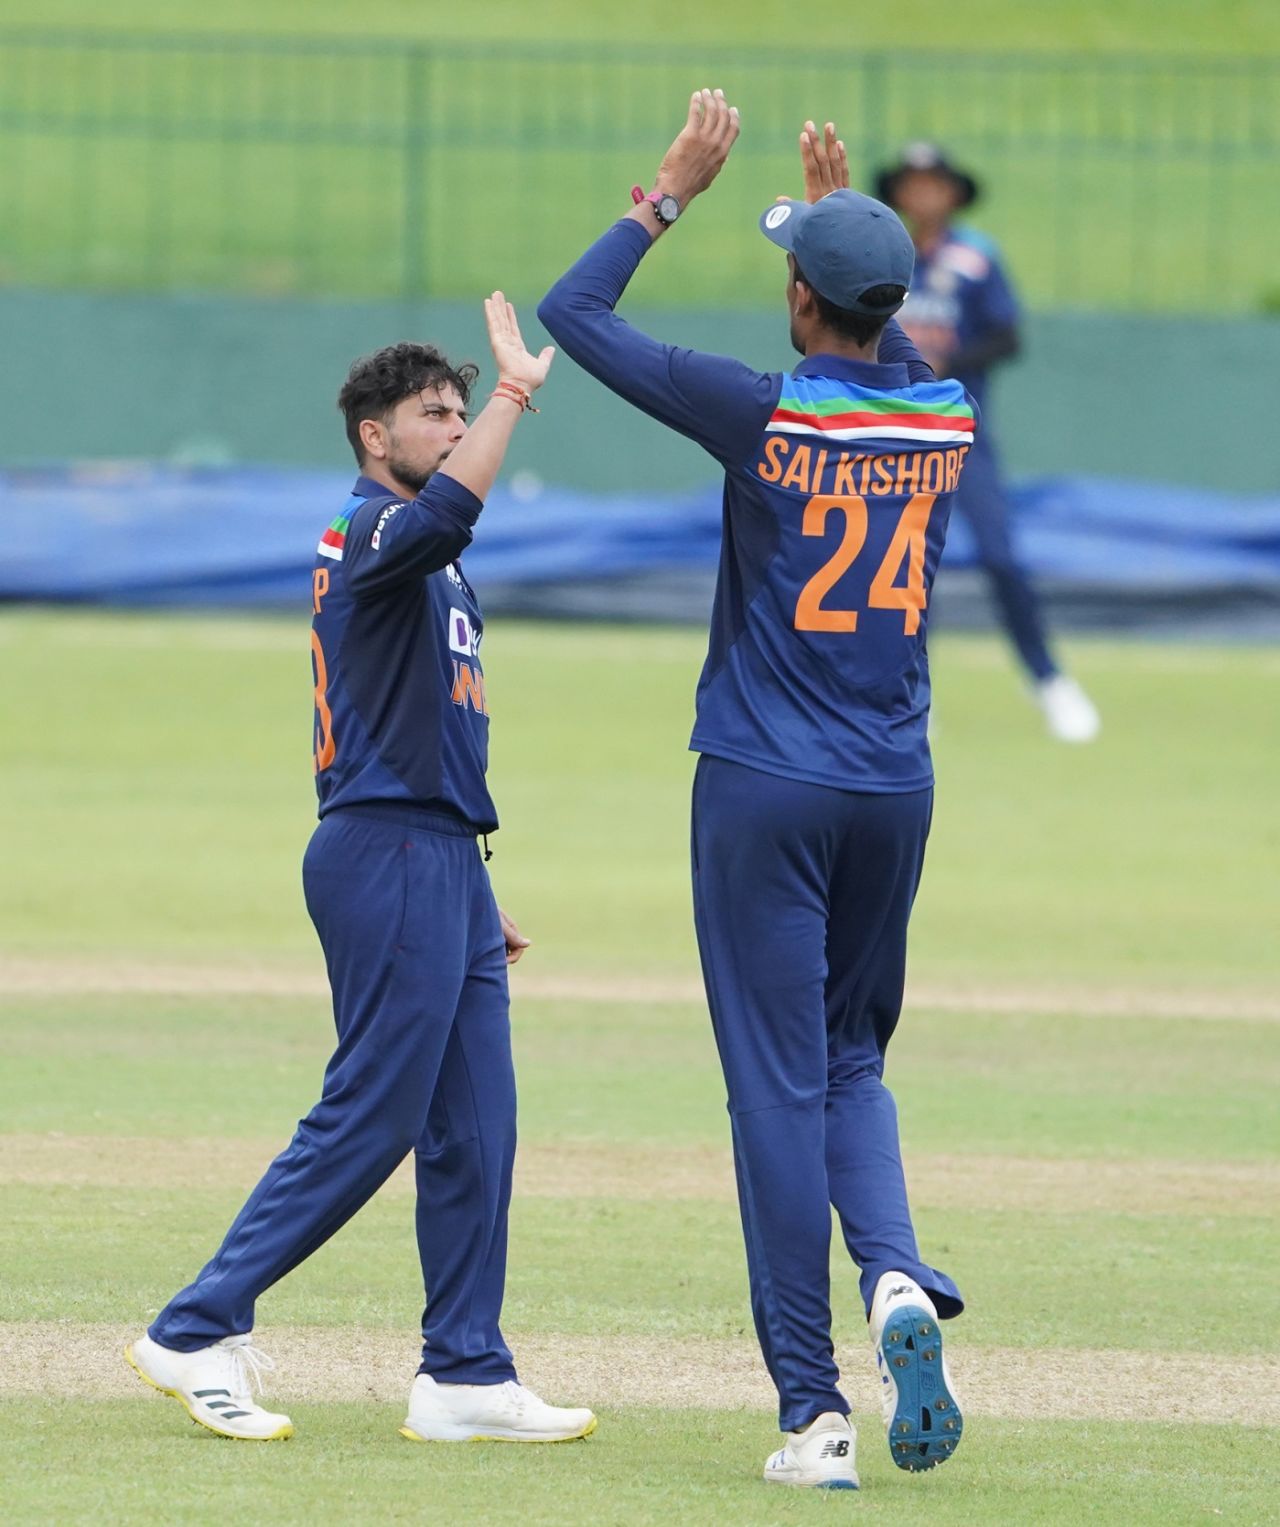 Kuldeep Yadav celebrates a wicket during an intra-squad practice match, Colombo, July 7, 2021